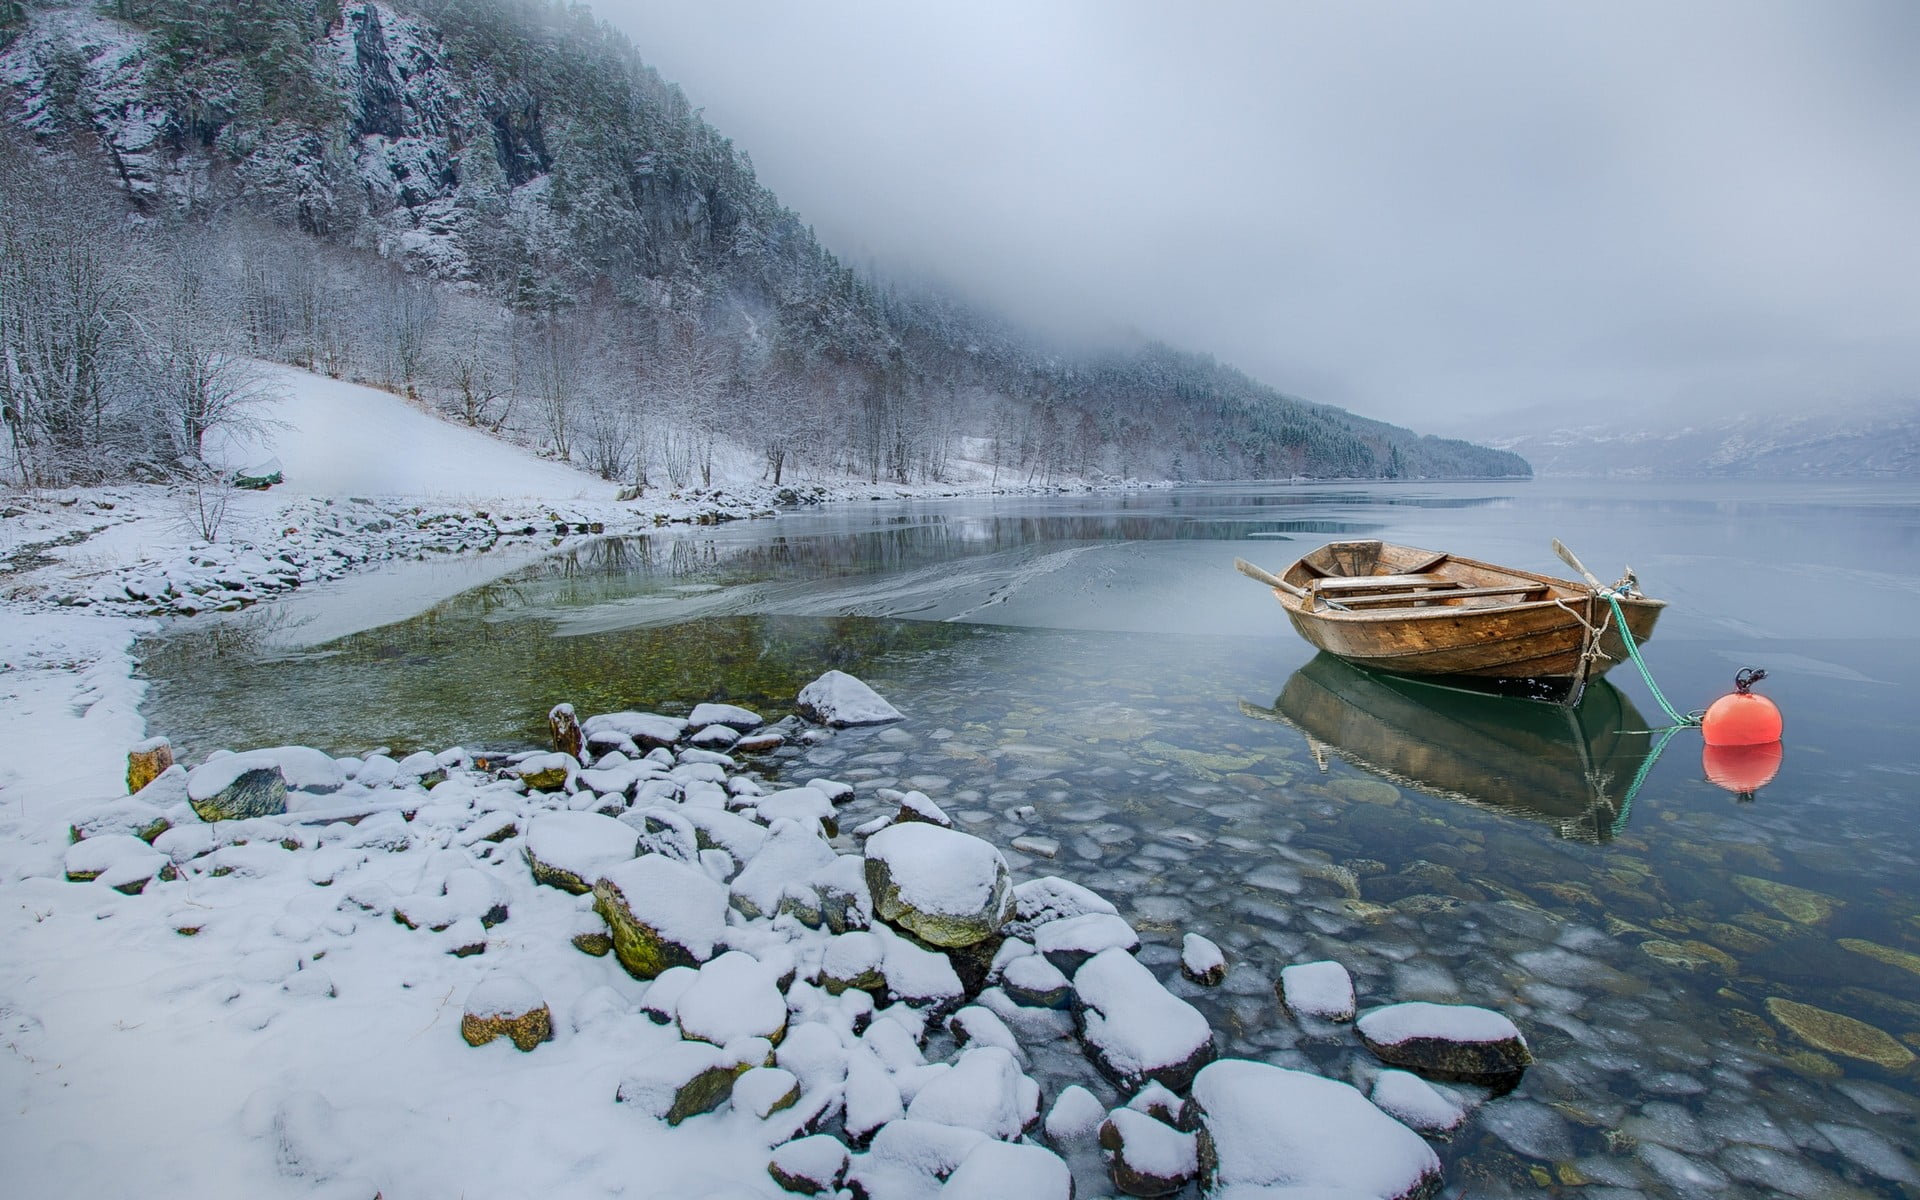 brown boat, nature, landscape, snow, lake, mountains, winter